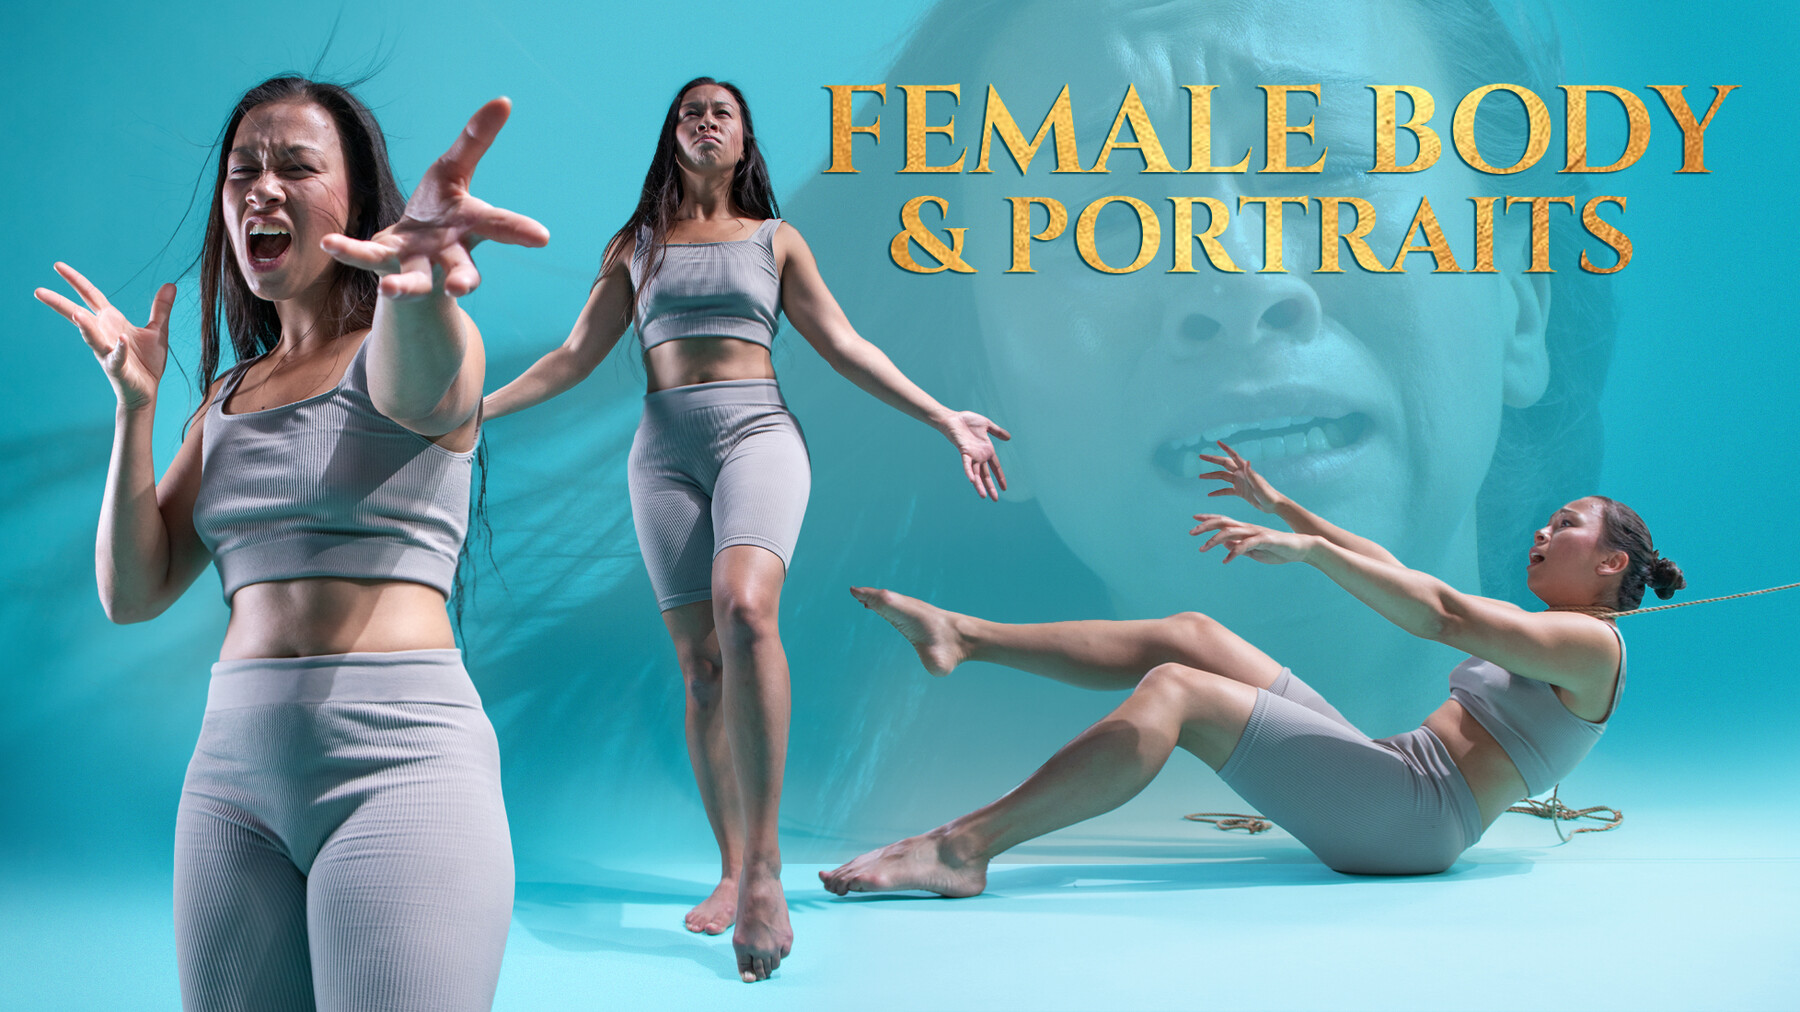 ArtStation - Male and Female Body Photo Reference Pack For Artists 476  JPEGs